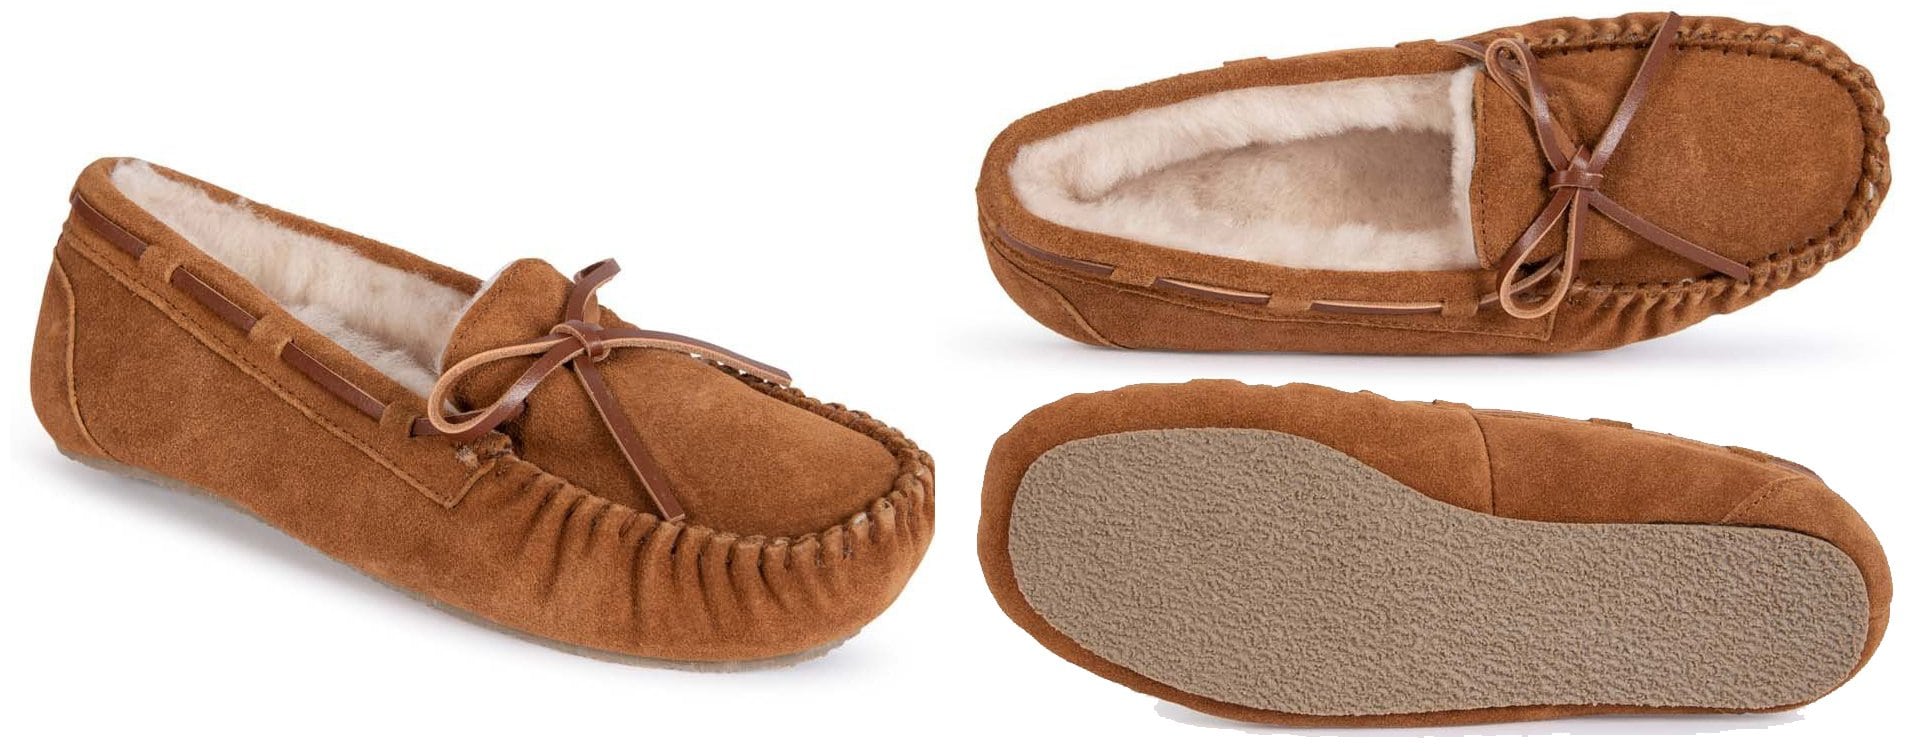 Comfy and warm, The House of Bruar moccasins are made from 100% natural sheepskin and are designed to be lightweight, breathable, and thermo-regulating